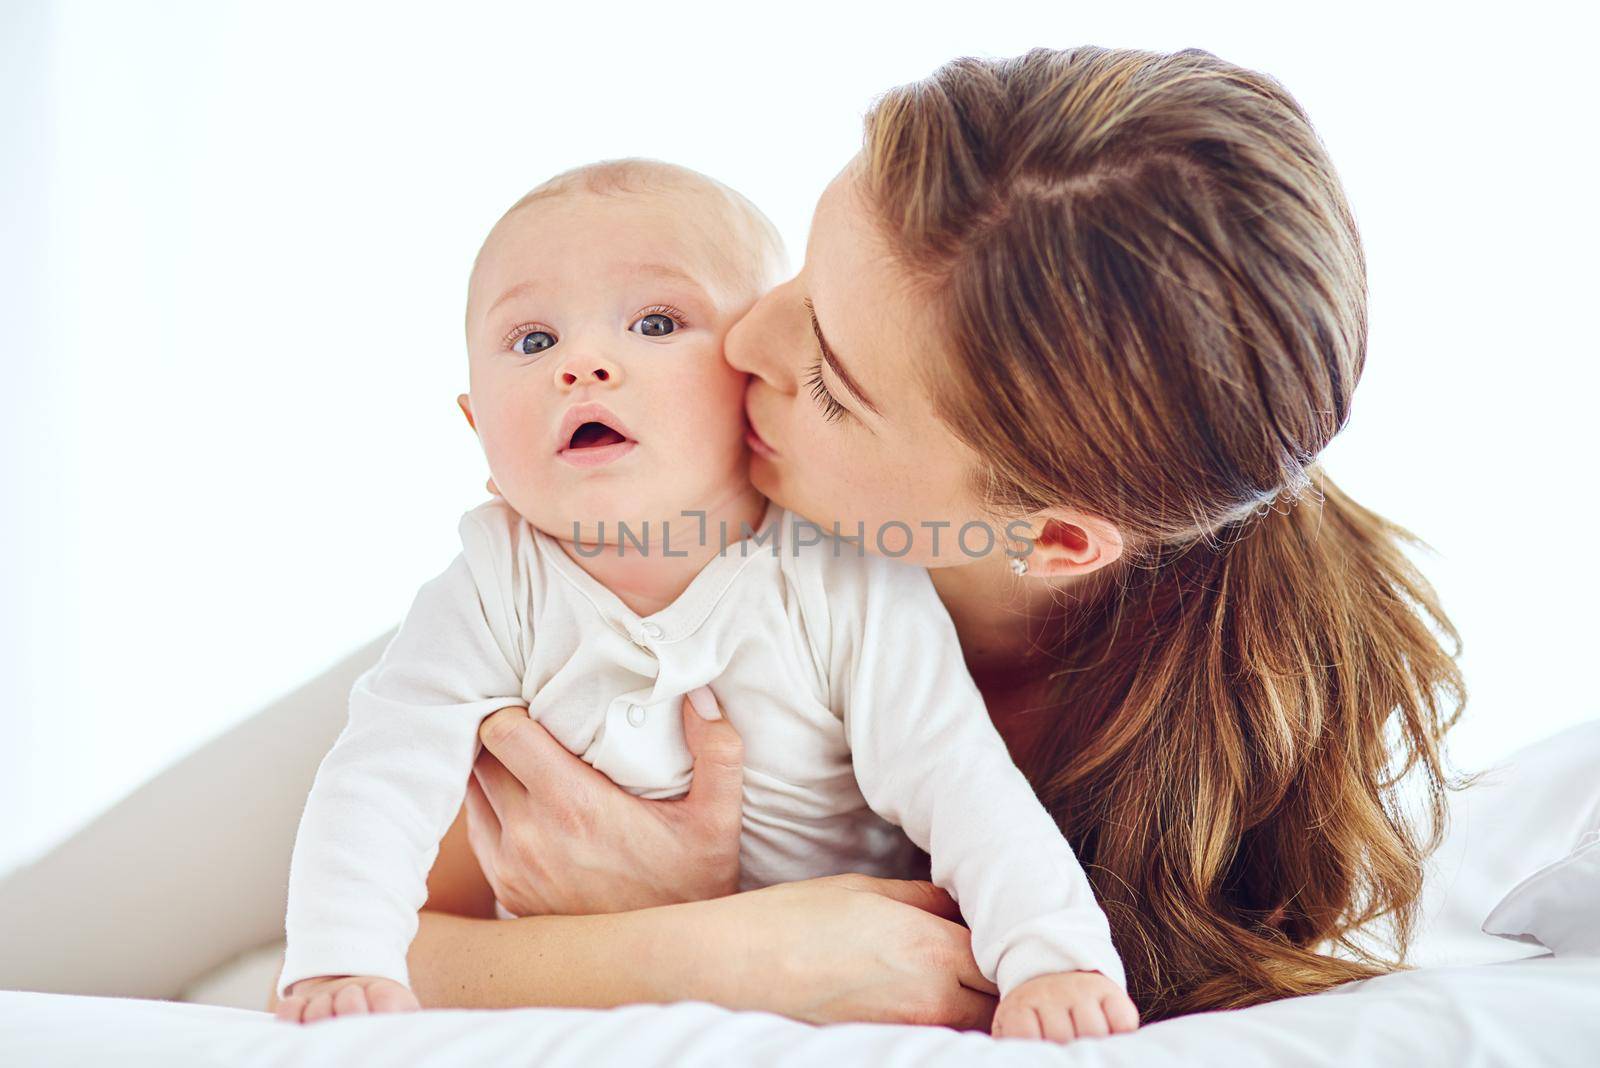 Kisses, cuddles and snuggles. a young mother bonding with her adorable baby boy at home